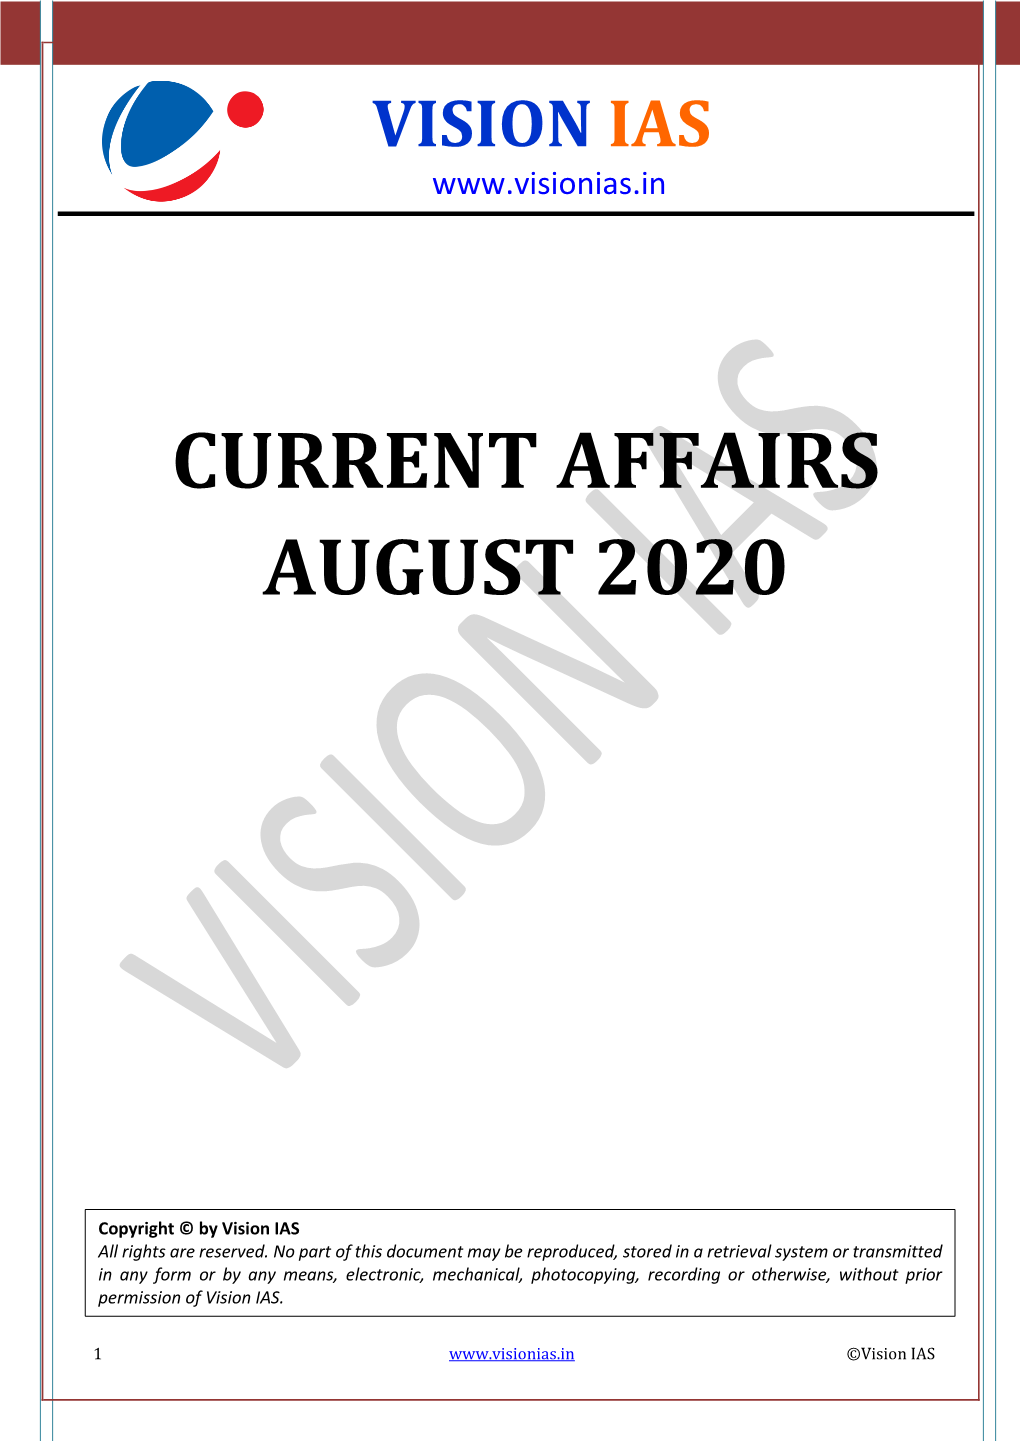 Current Affairs August 2020